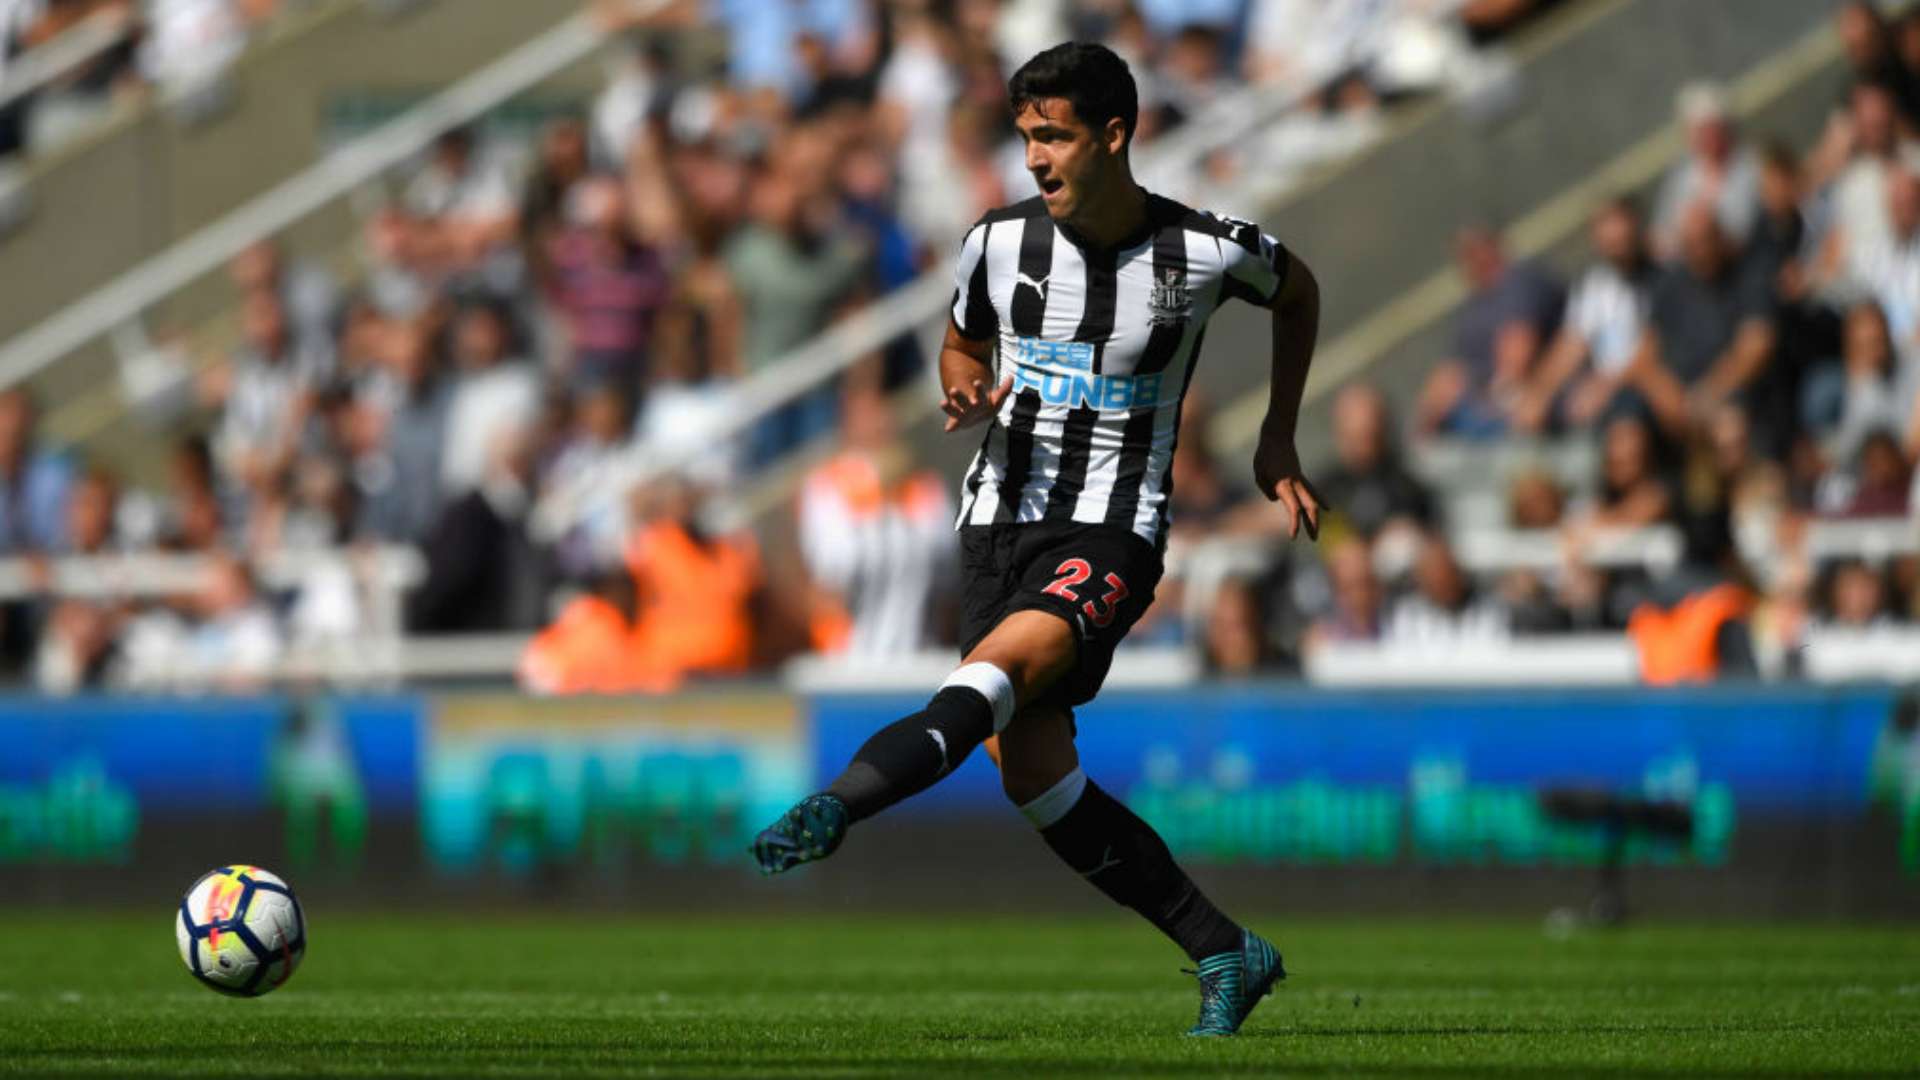 The Newcastle player Mikel Merino